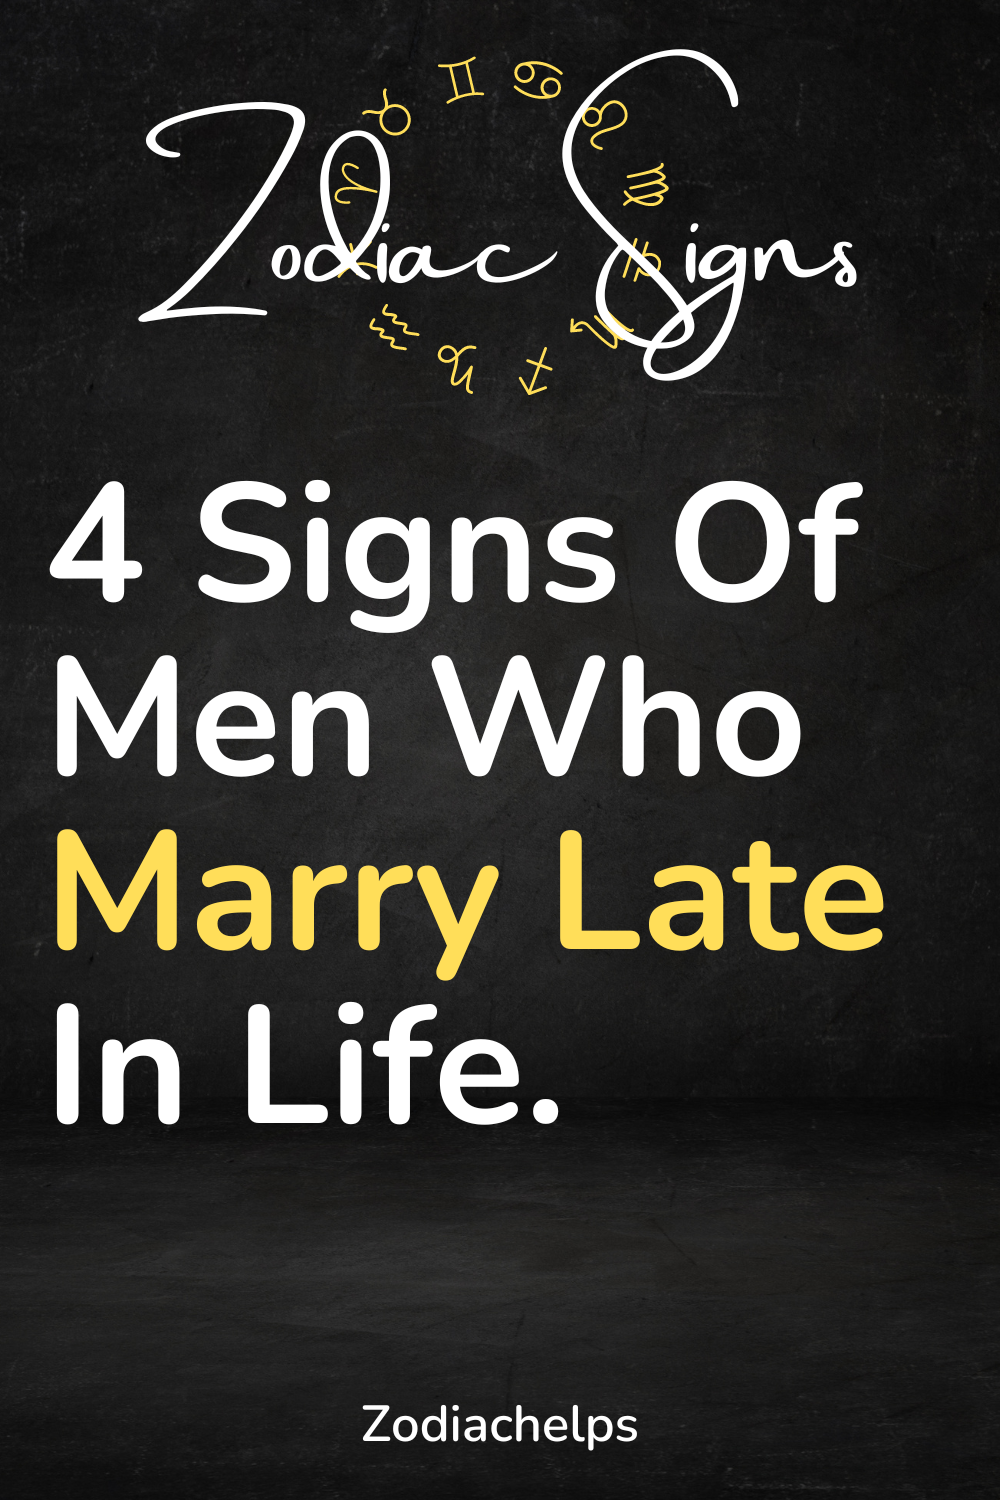 4 Signs Of Men Who Marry Late In Life. At What Age Do They Move Into Their Home?